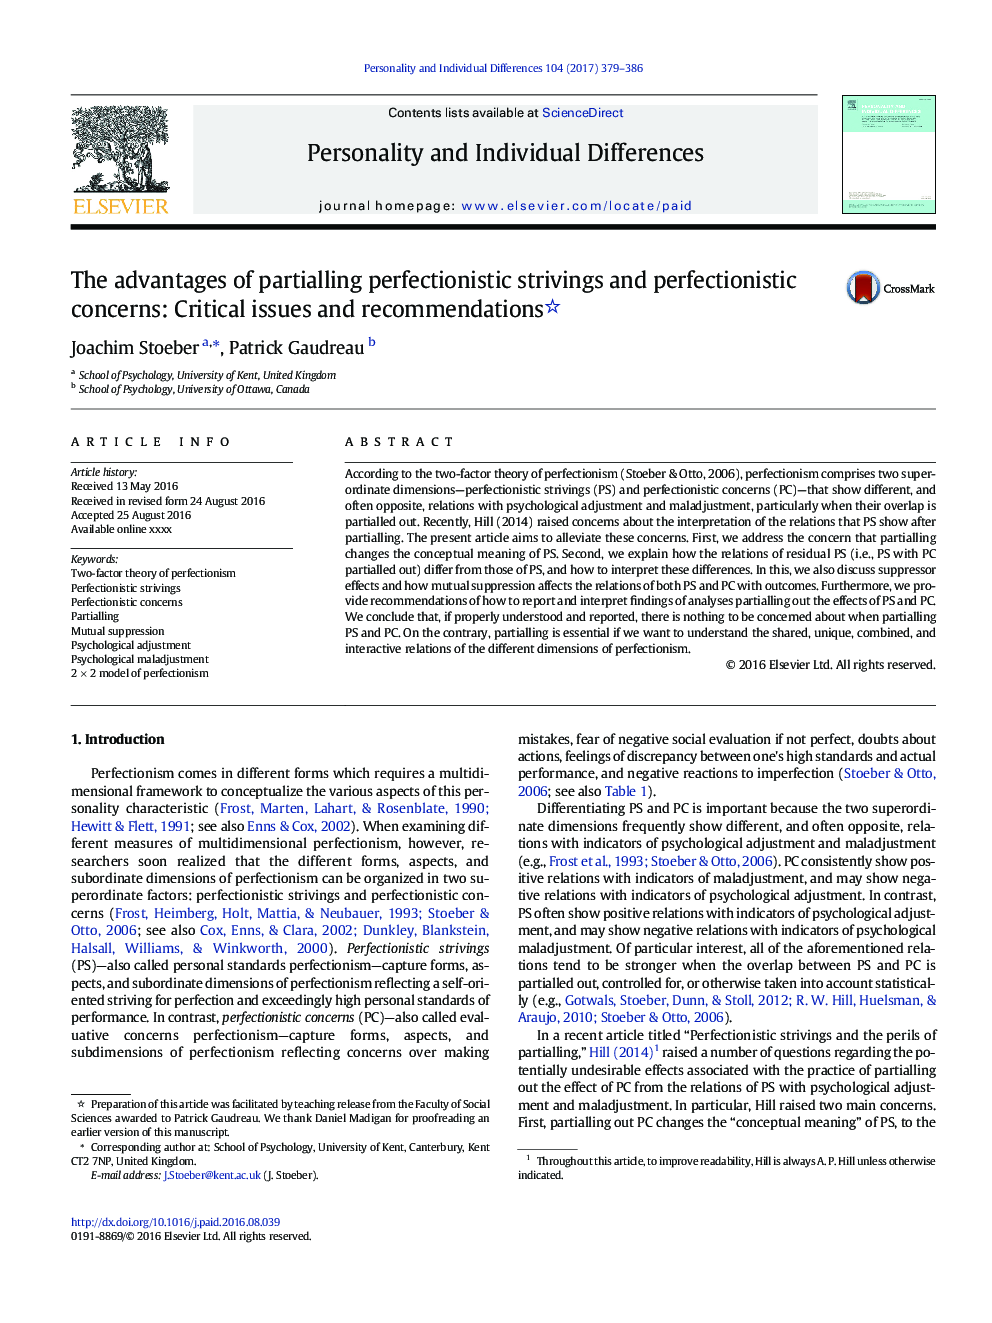 The advantages of partialling perfectionistic strivings and perfectionistic concerns: Critical issues and recommendations